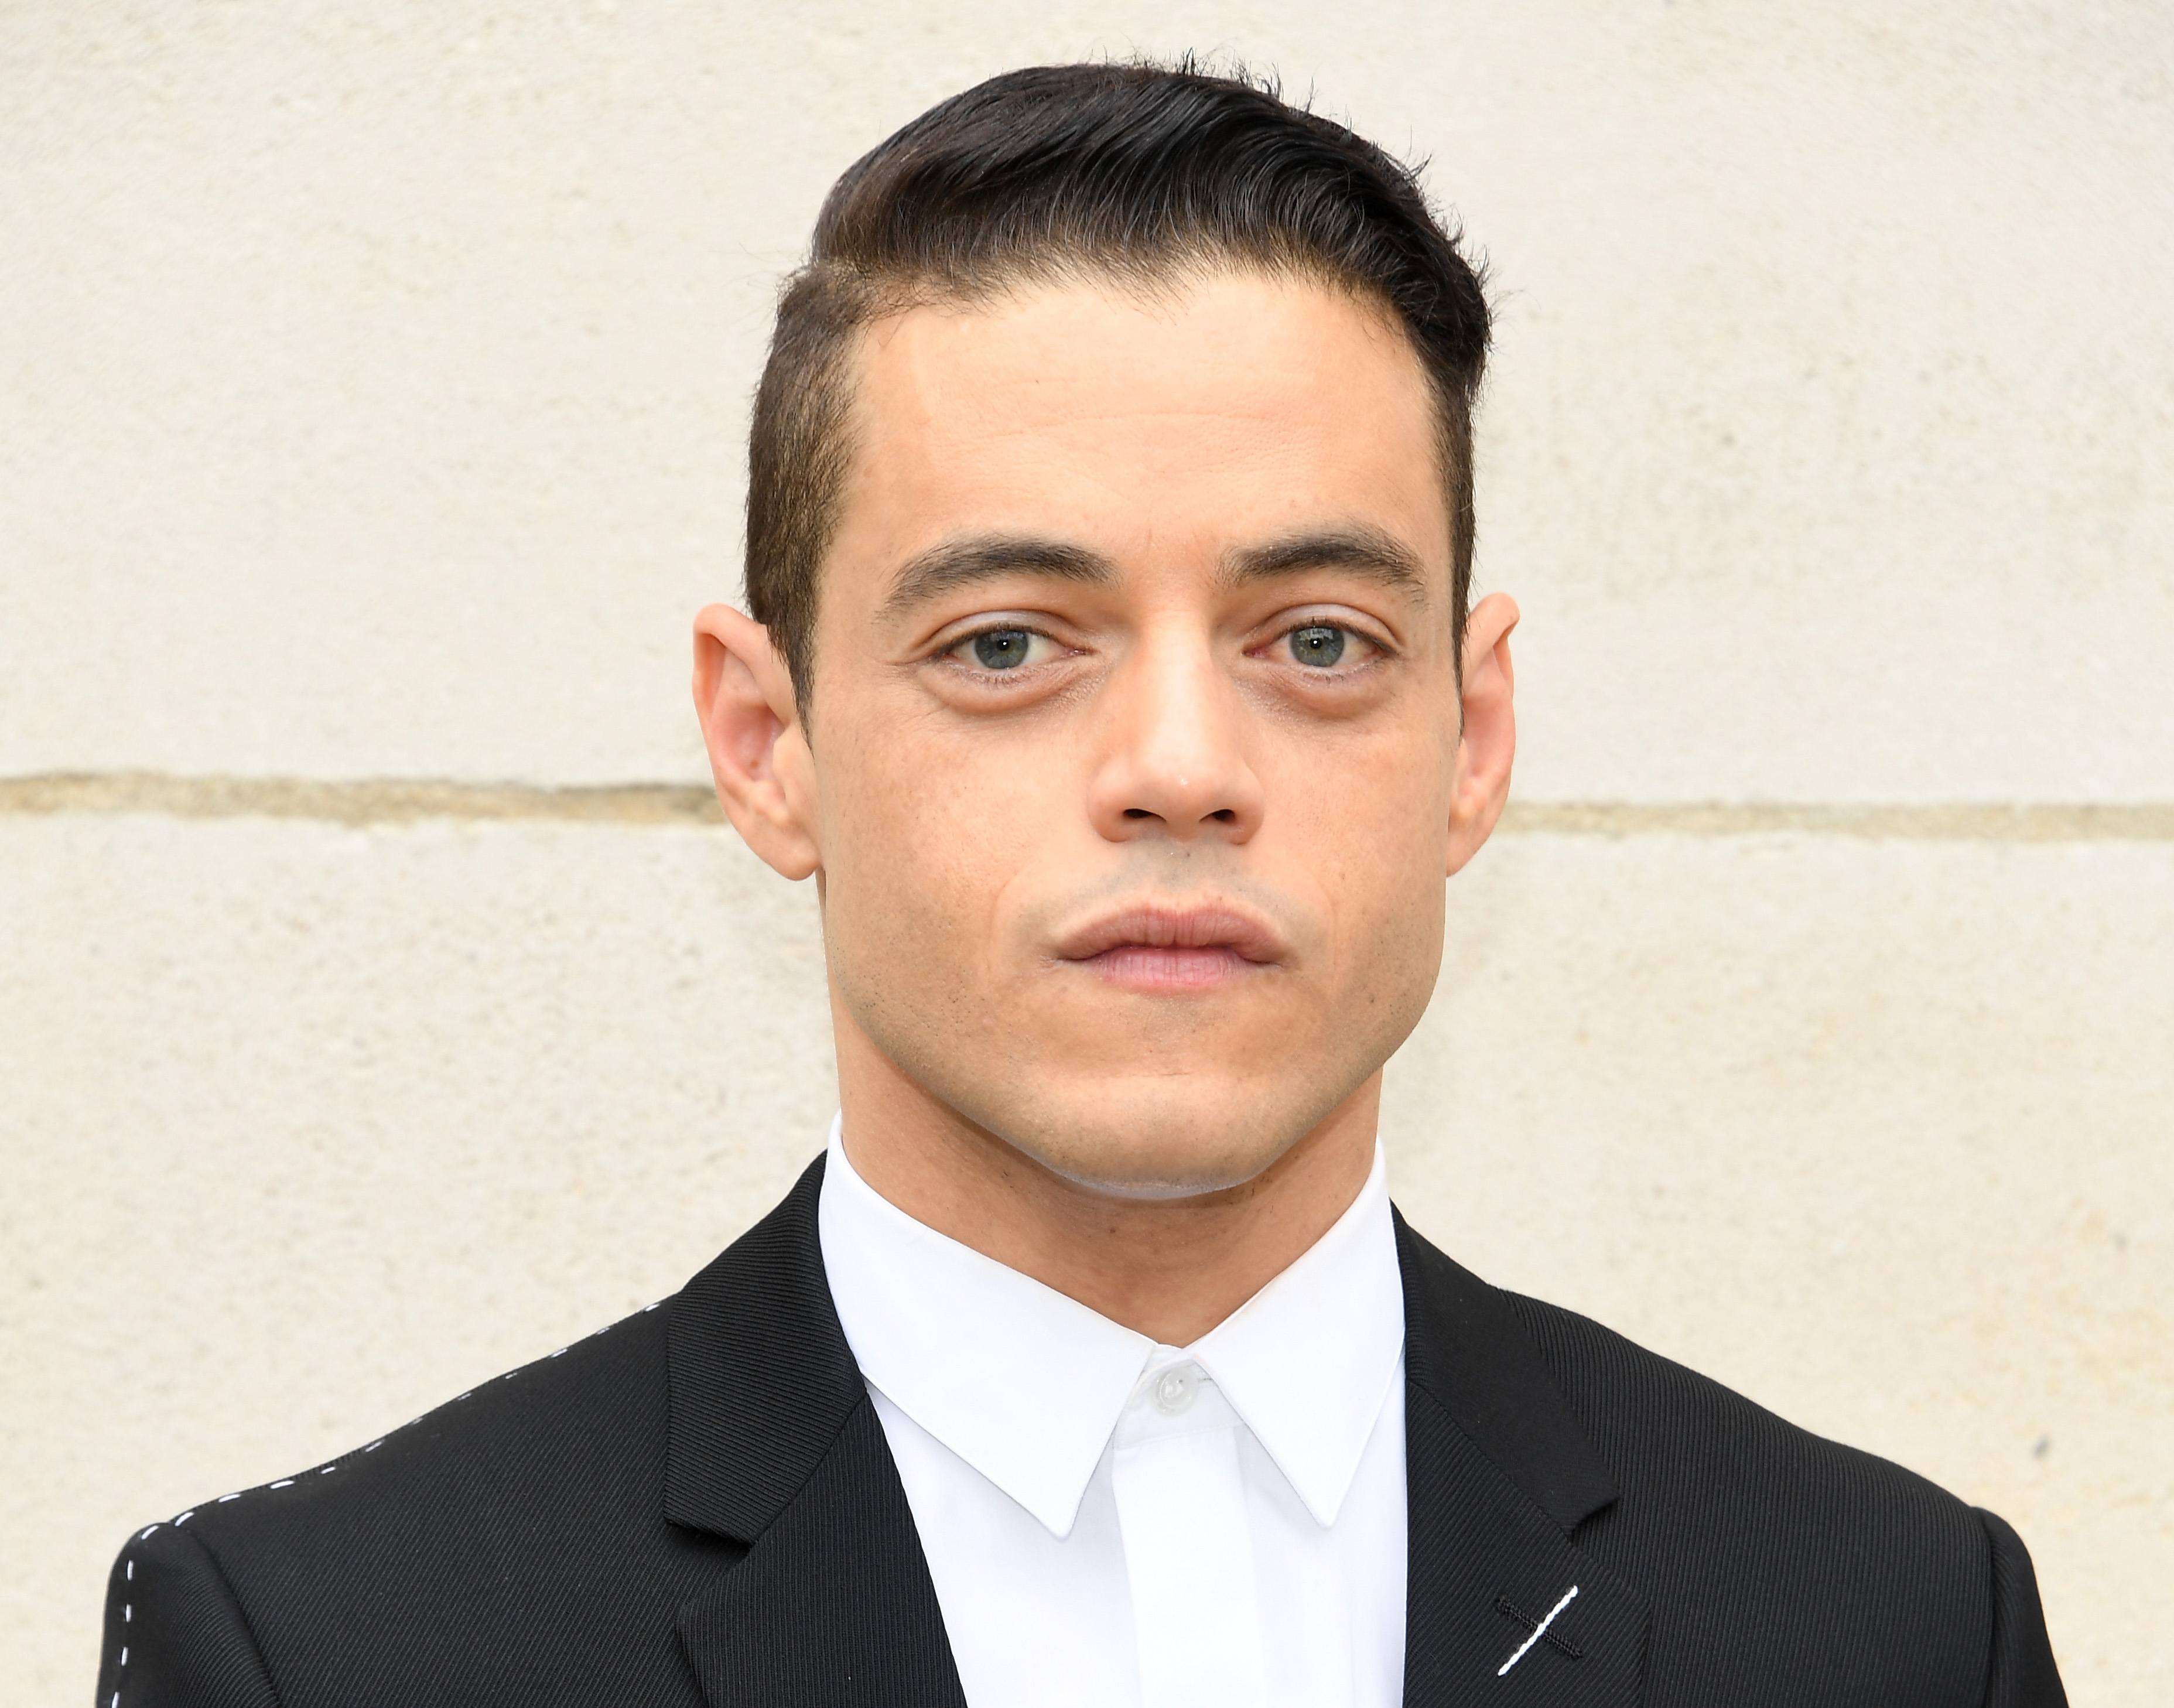 Rami Malek attends the Dior Homme Menswear Spring/Summer 2018 show as part of Paris Fashion Week on June 24, 2017 in Paris, France. 